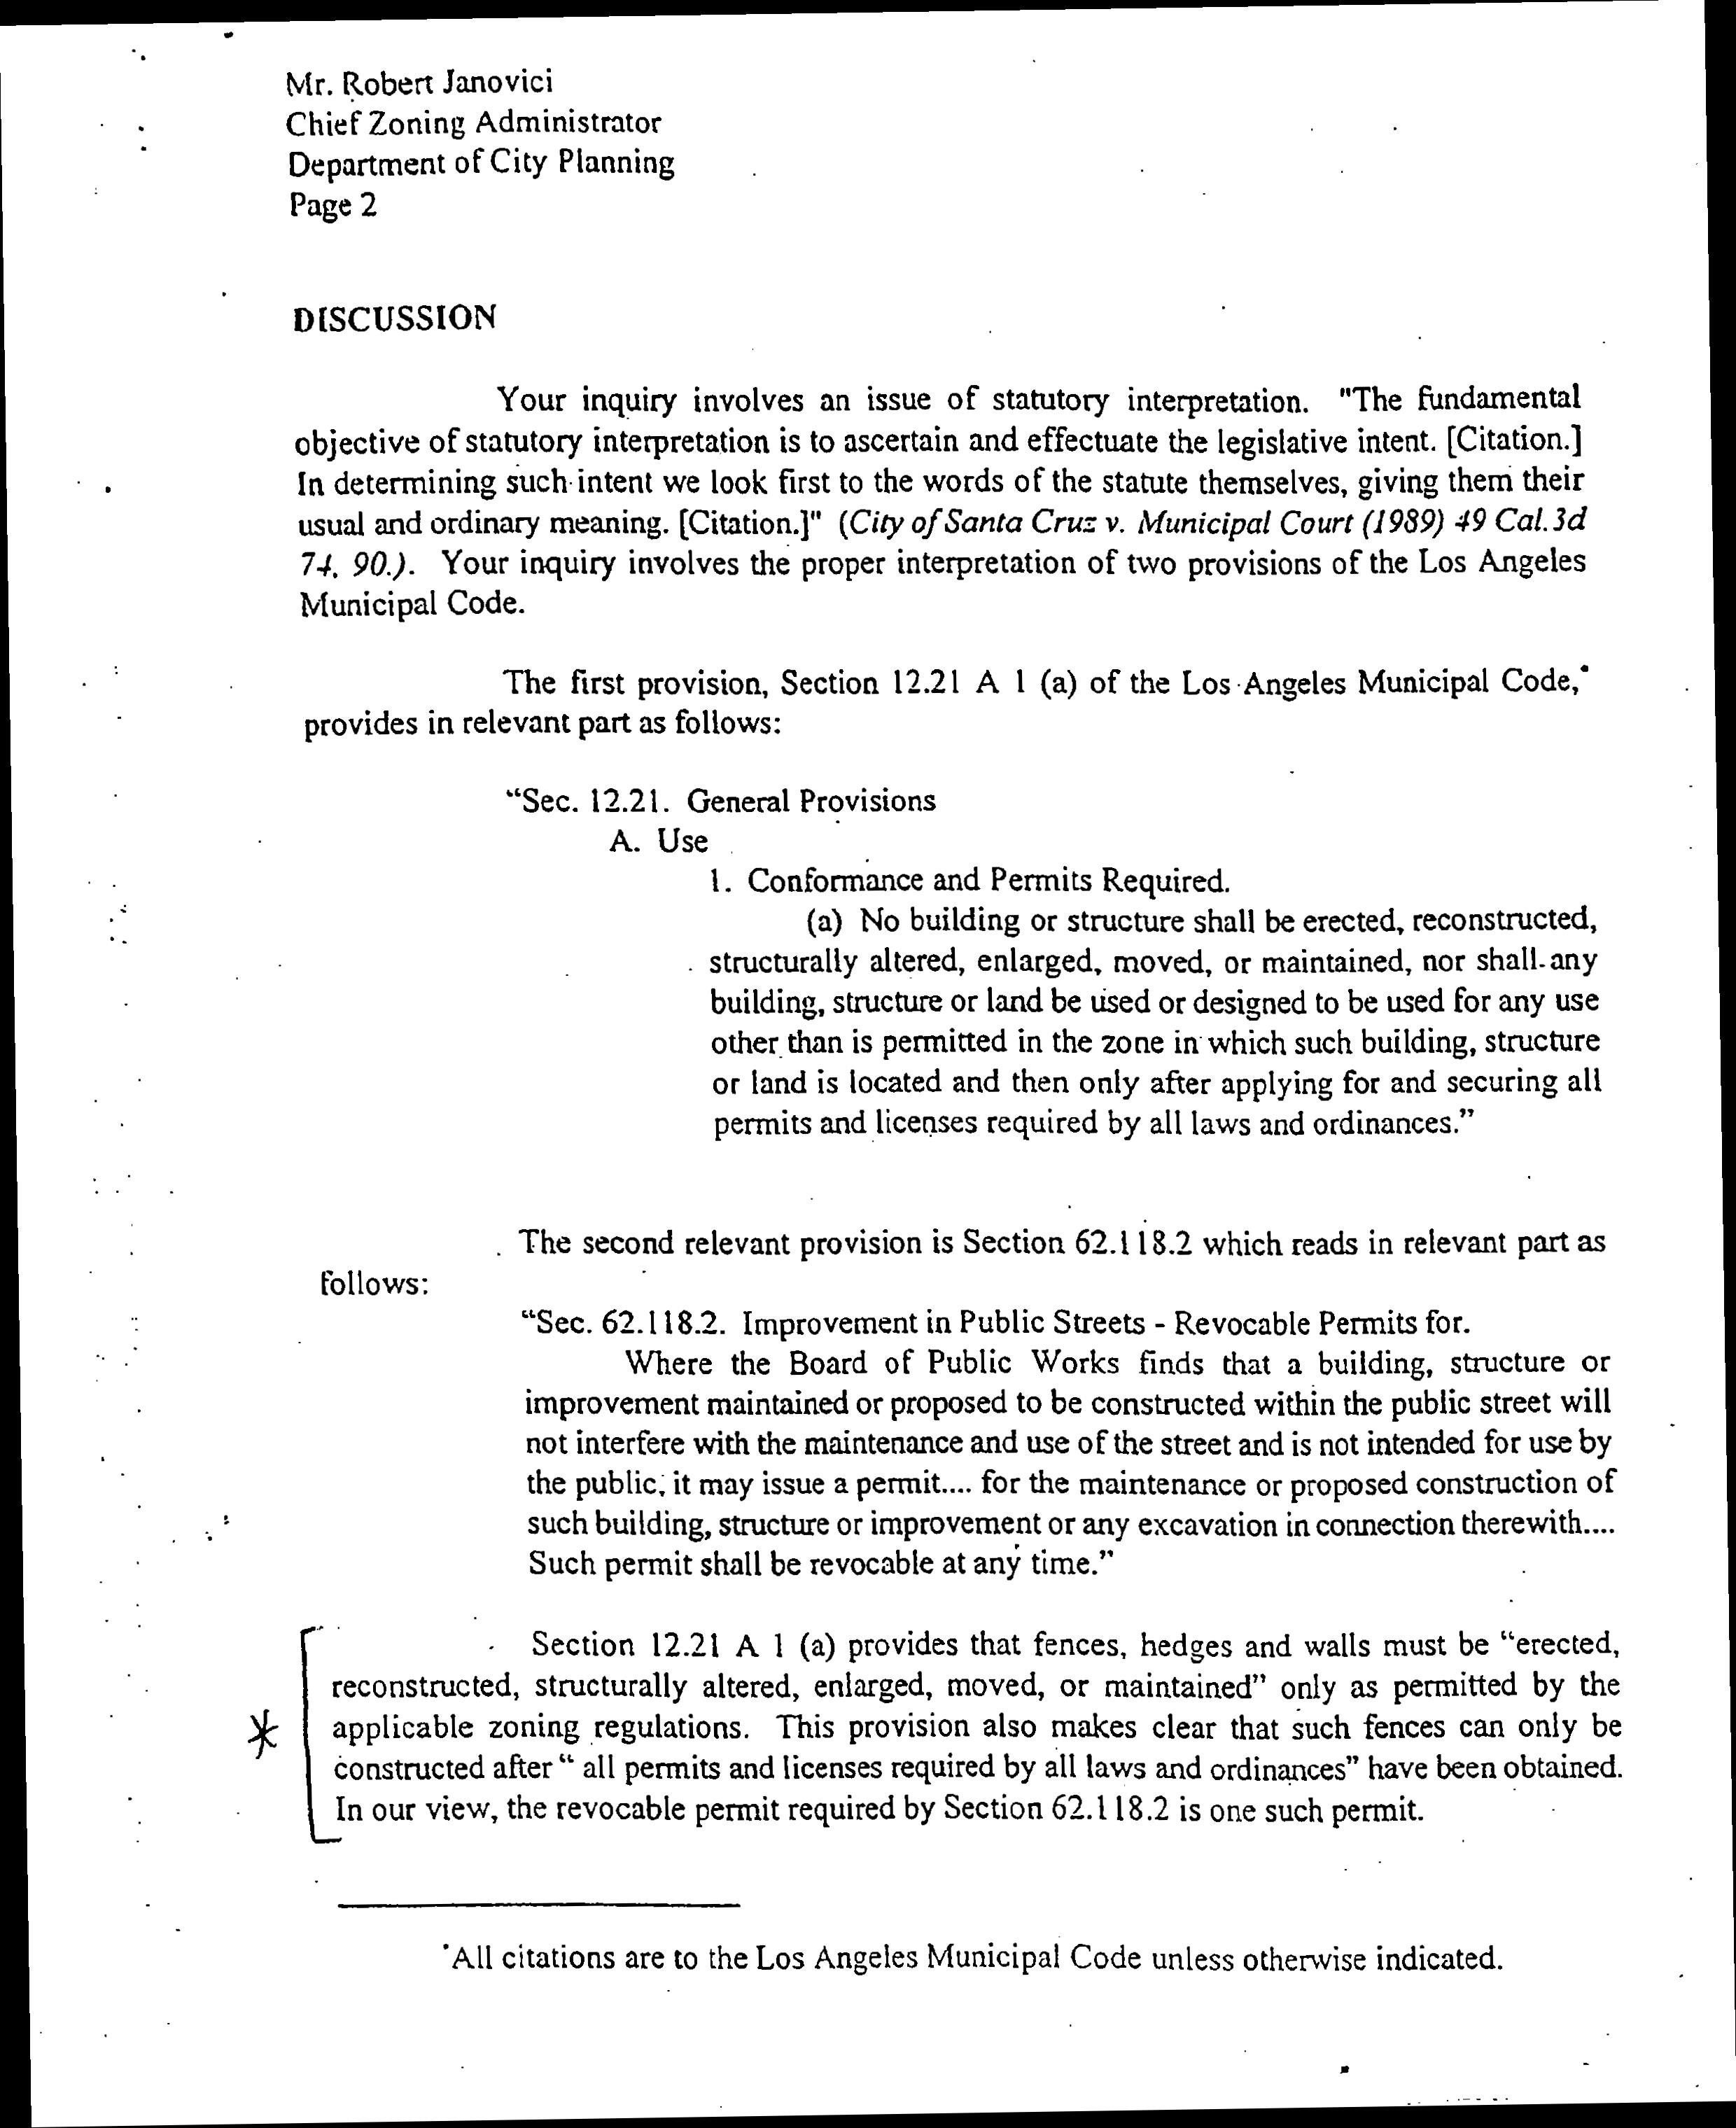 Screen shot of  page 2 of a Revocable Permit Requirement Letter